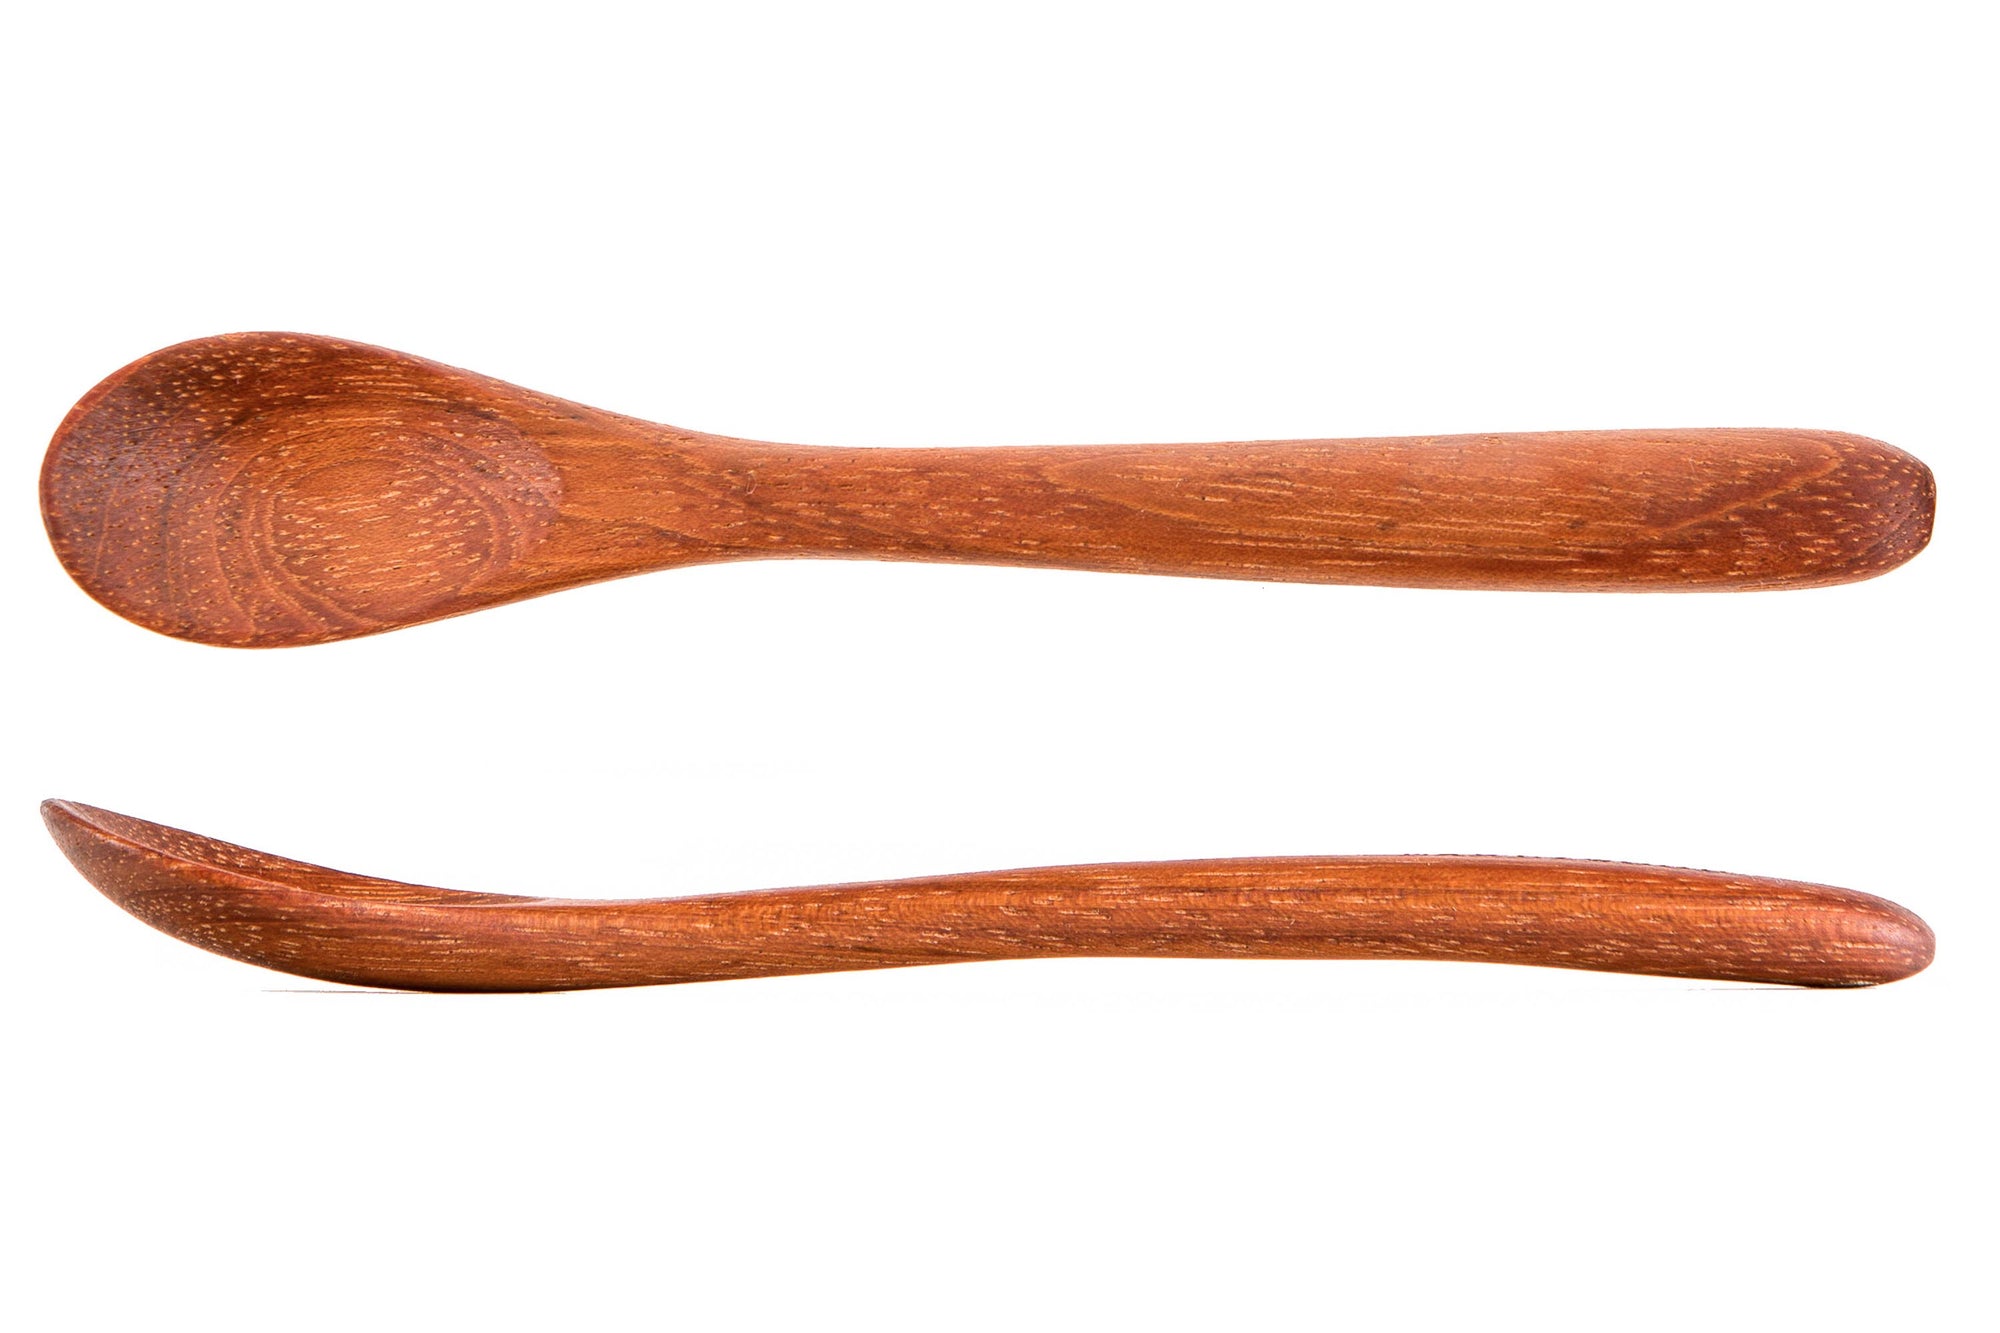 best wooden baby spoon for teething and feeding - Earlywood